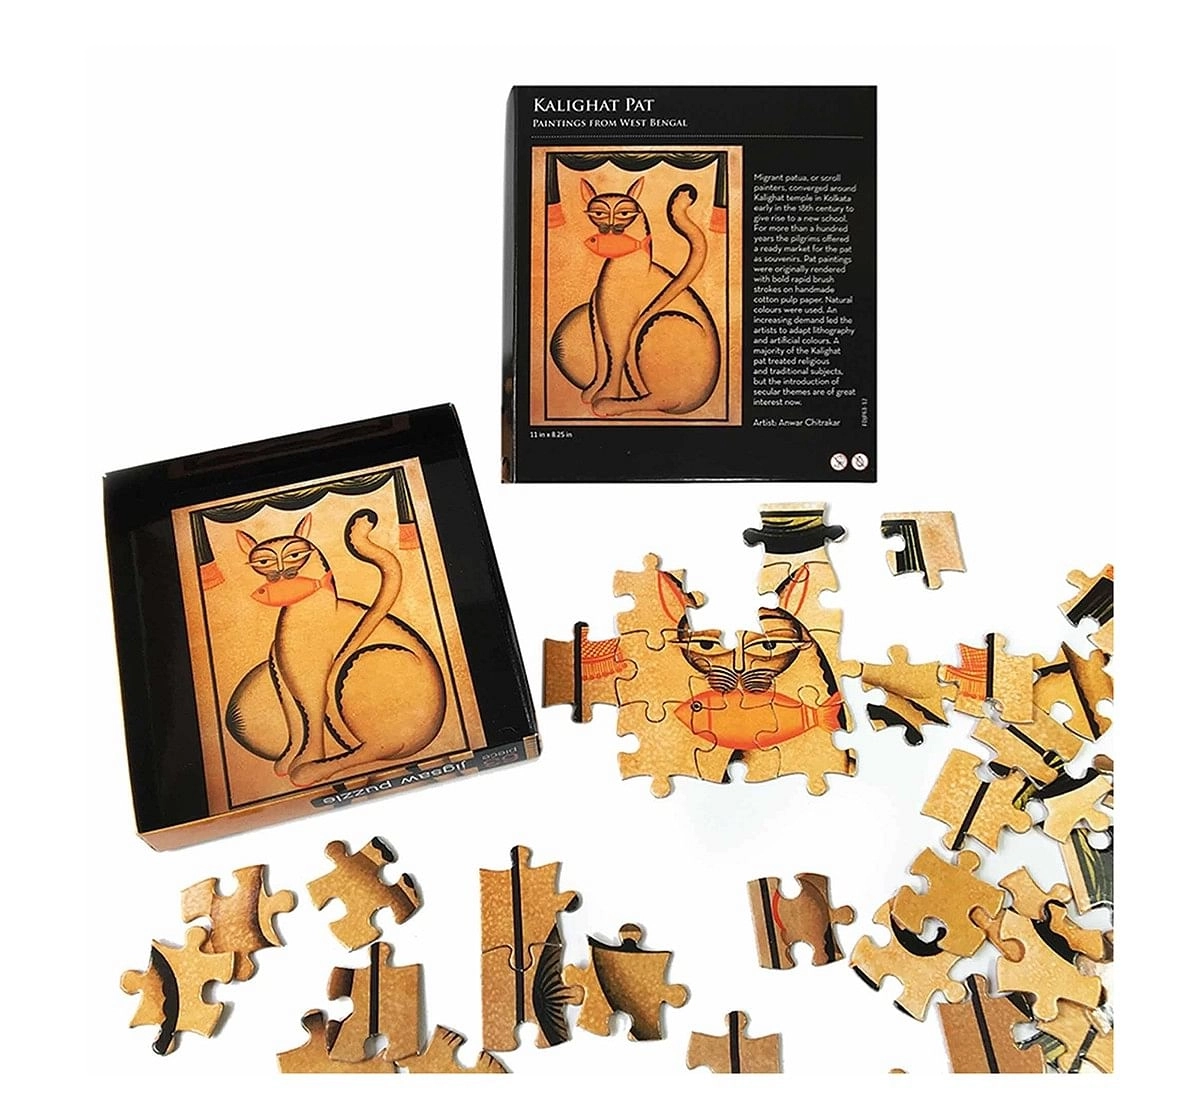  Frogg Kalighat Pat  63Pc Puzzles for Kids age 7Y+ (Mustard)